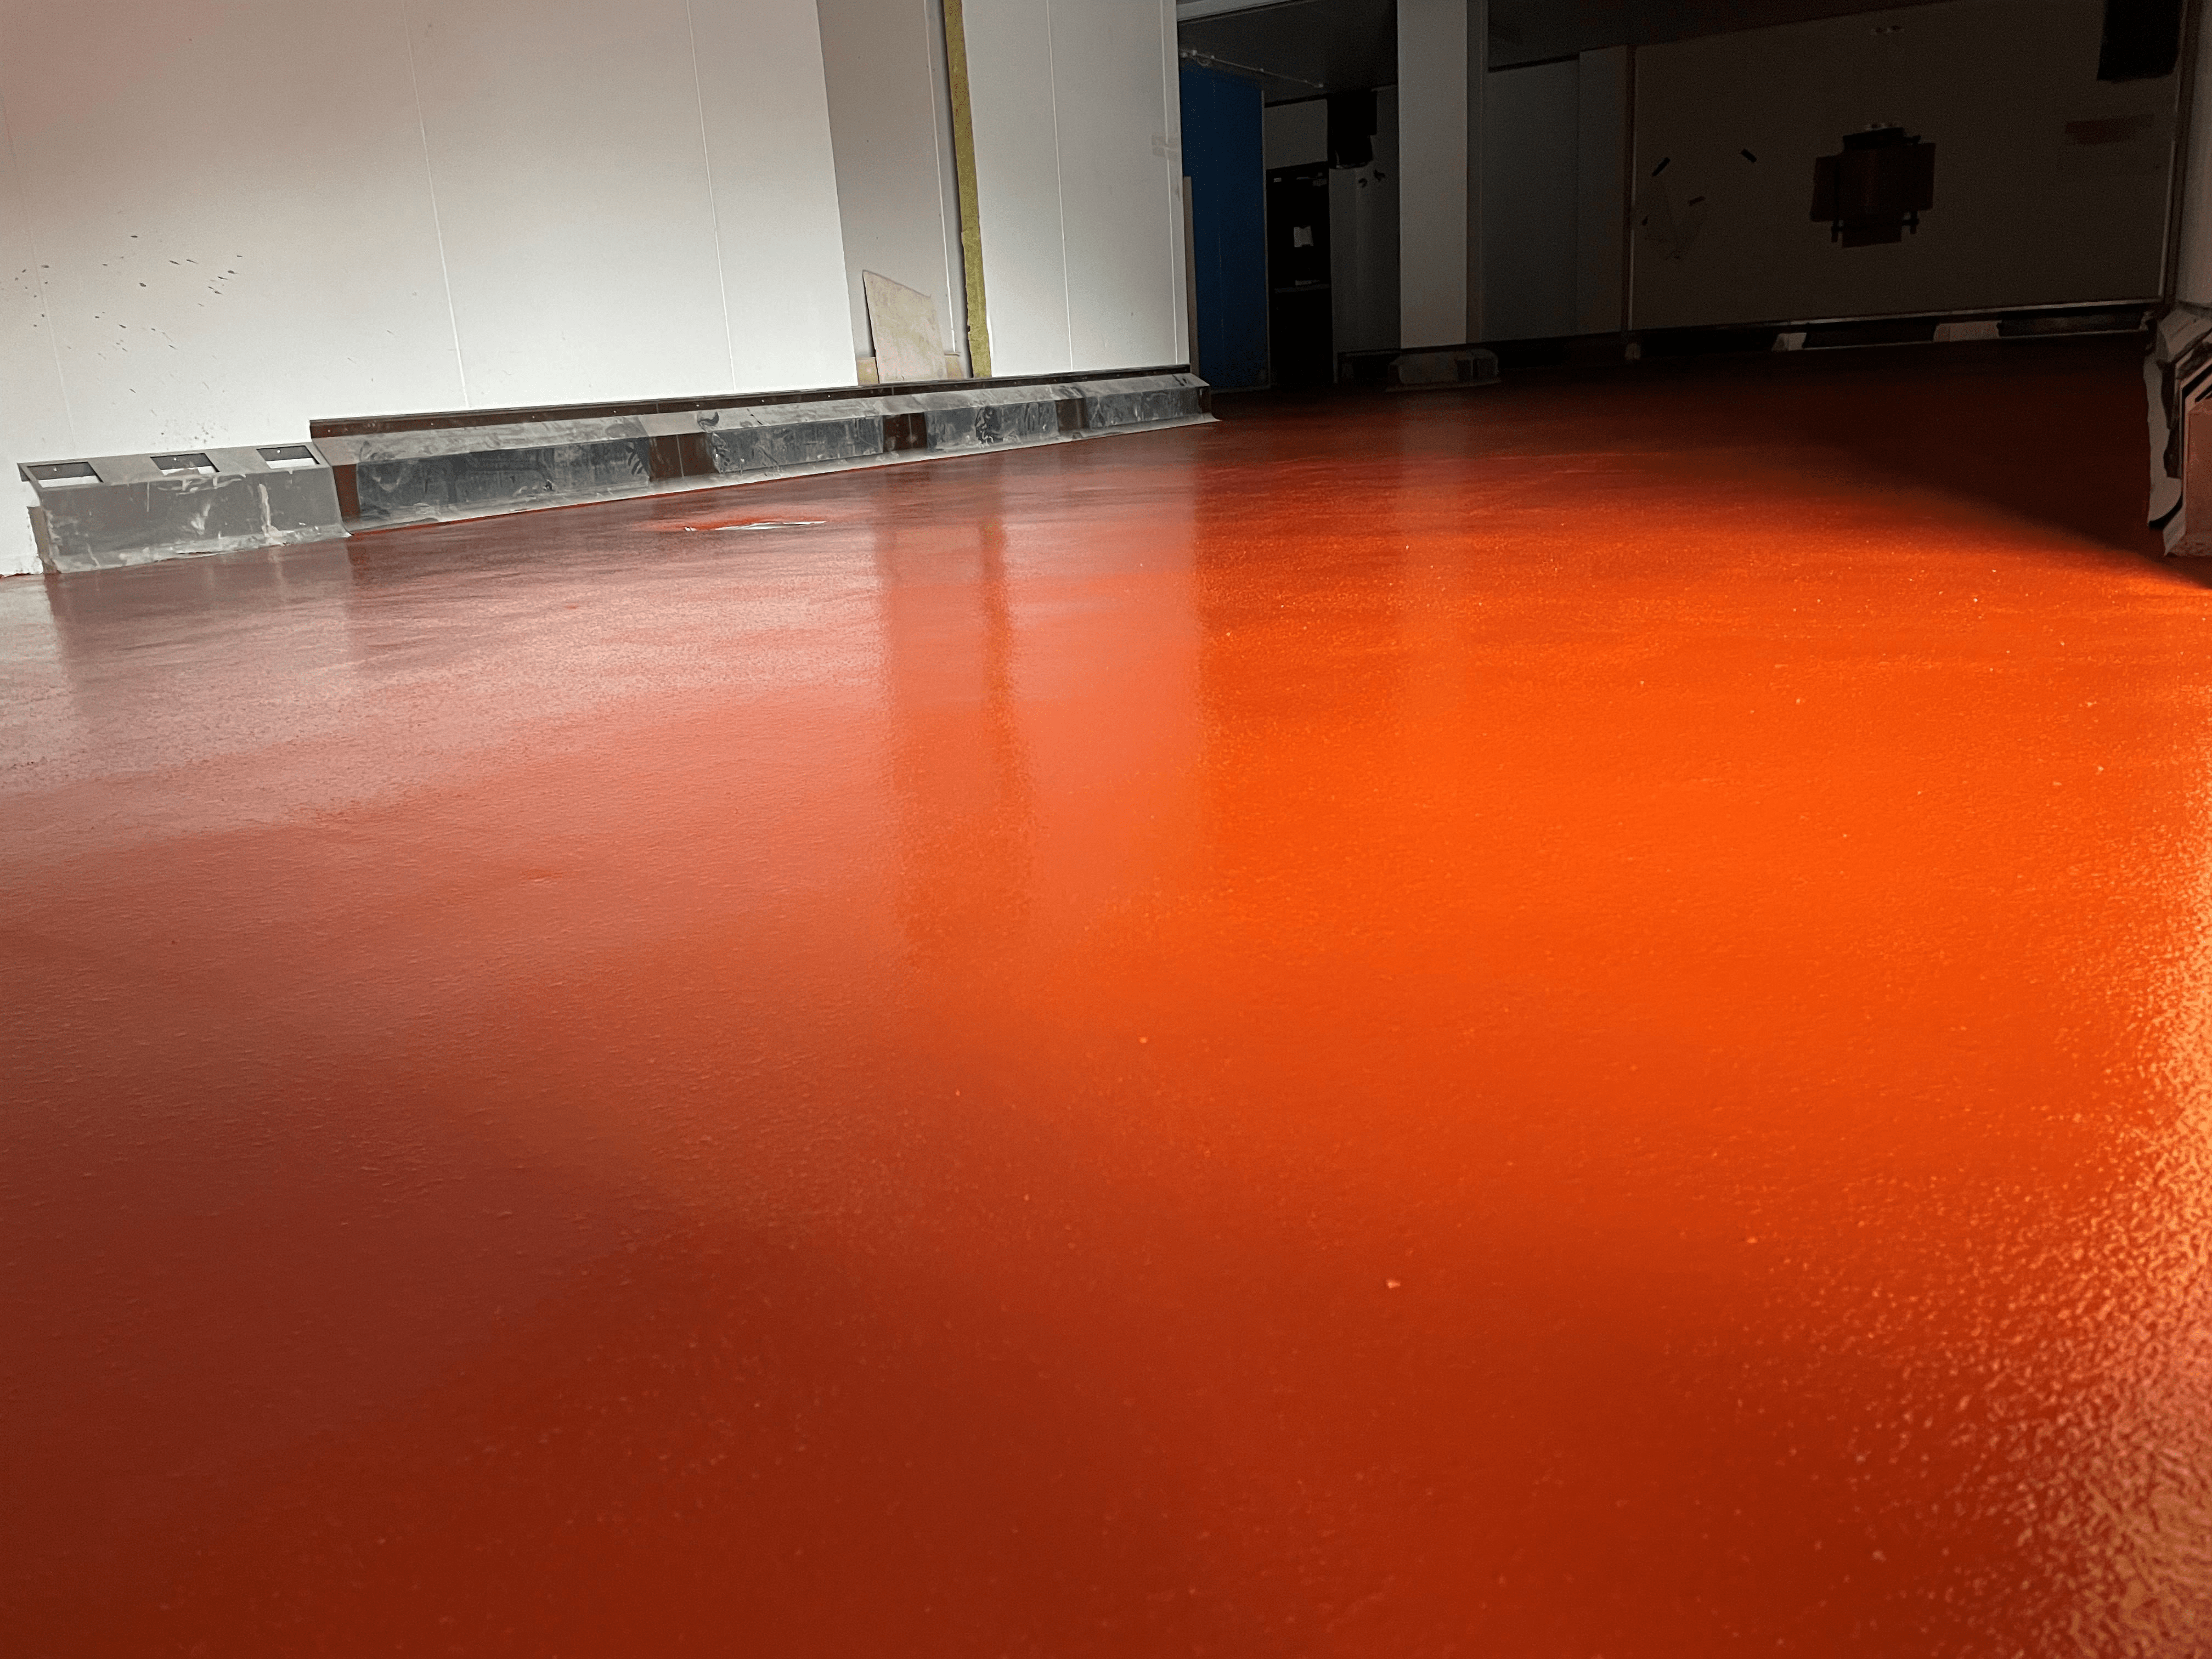 Upclose of Epoxy flooring showing its eco-friendly benefits